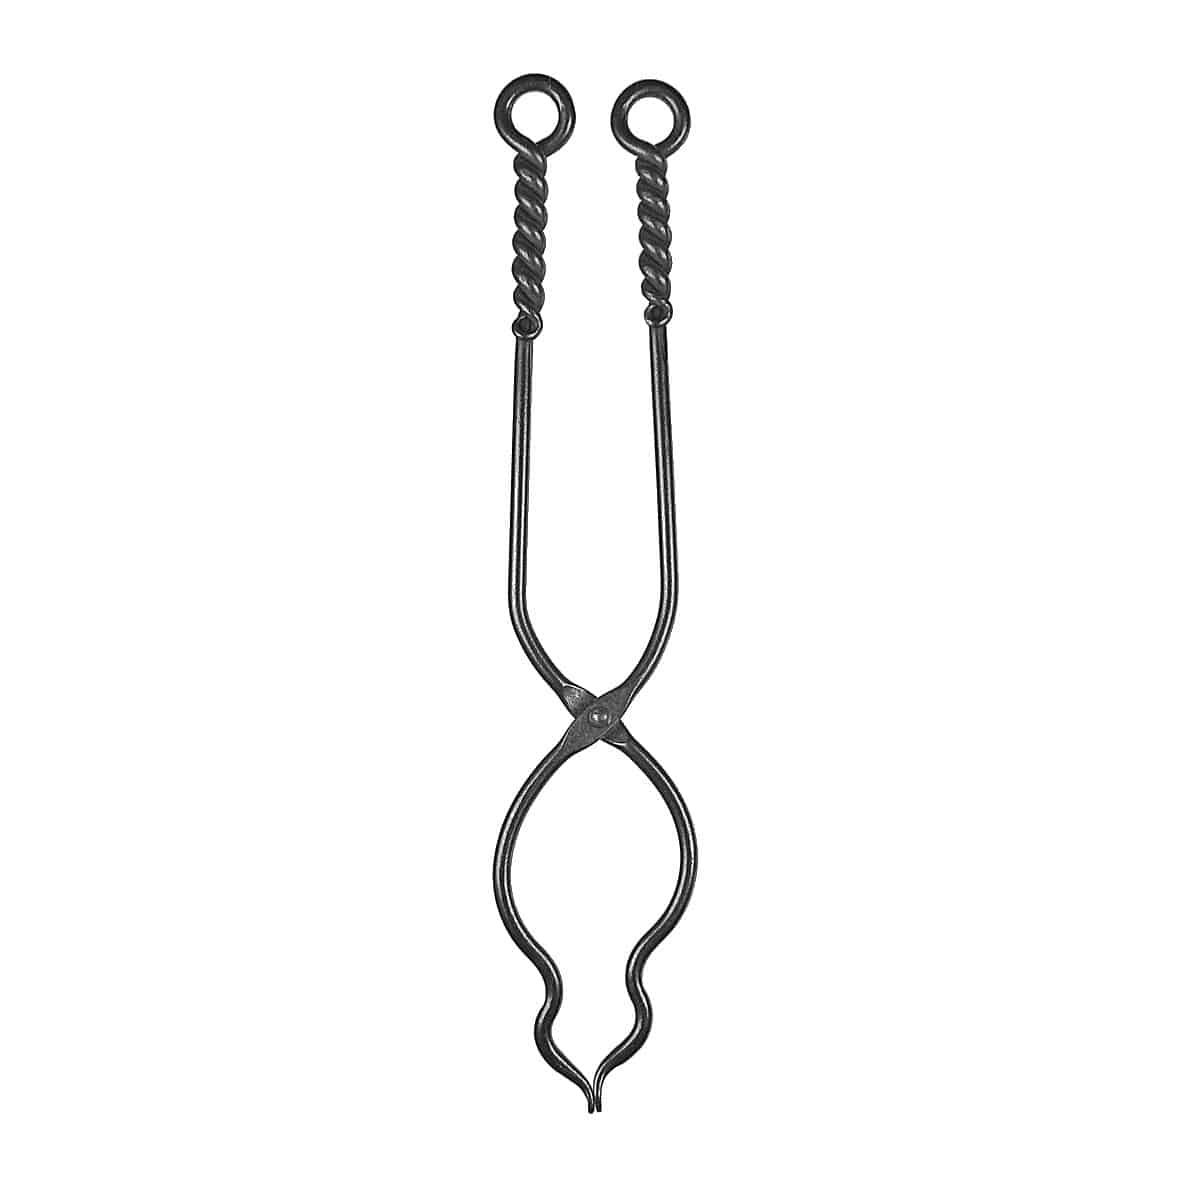 Twisted Handle Tongs, small